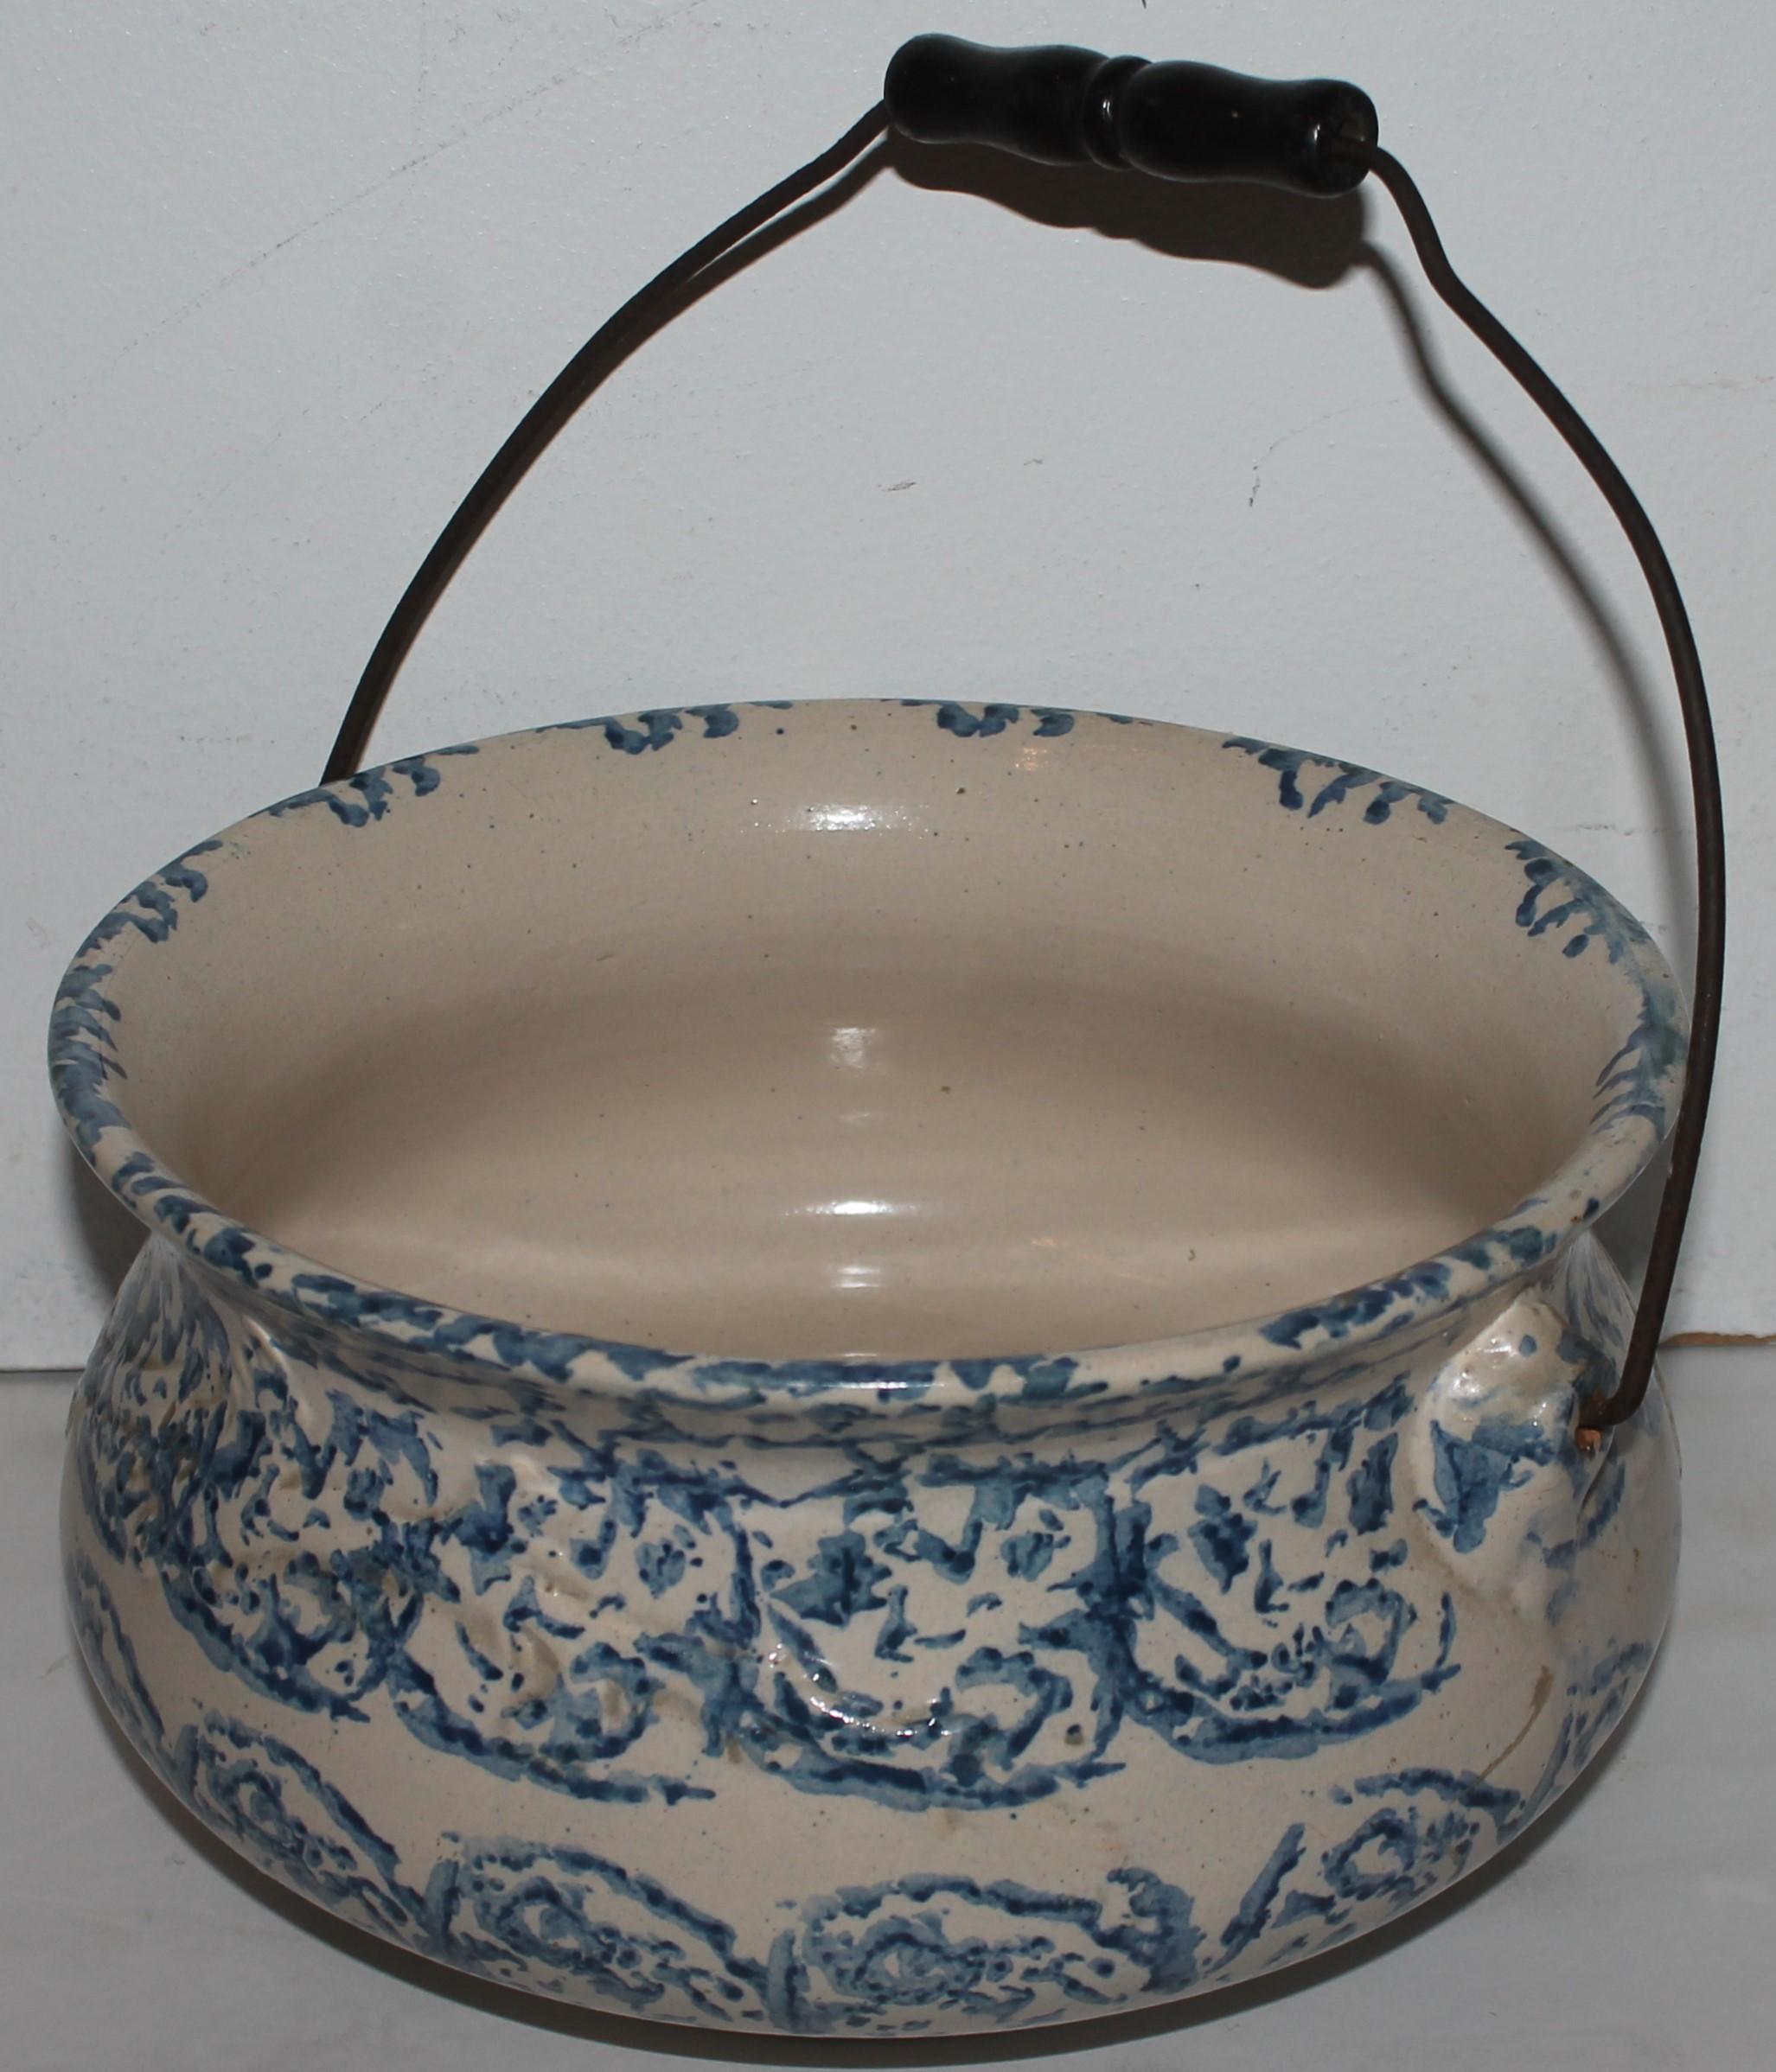 This most unusual shape sponge ware pottery bucket is in very good condition. It has the original bail handle and in fine condition.